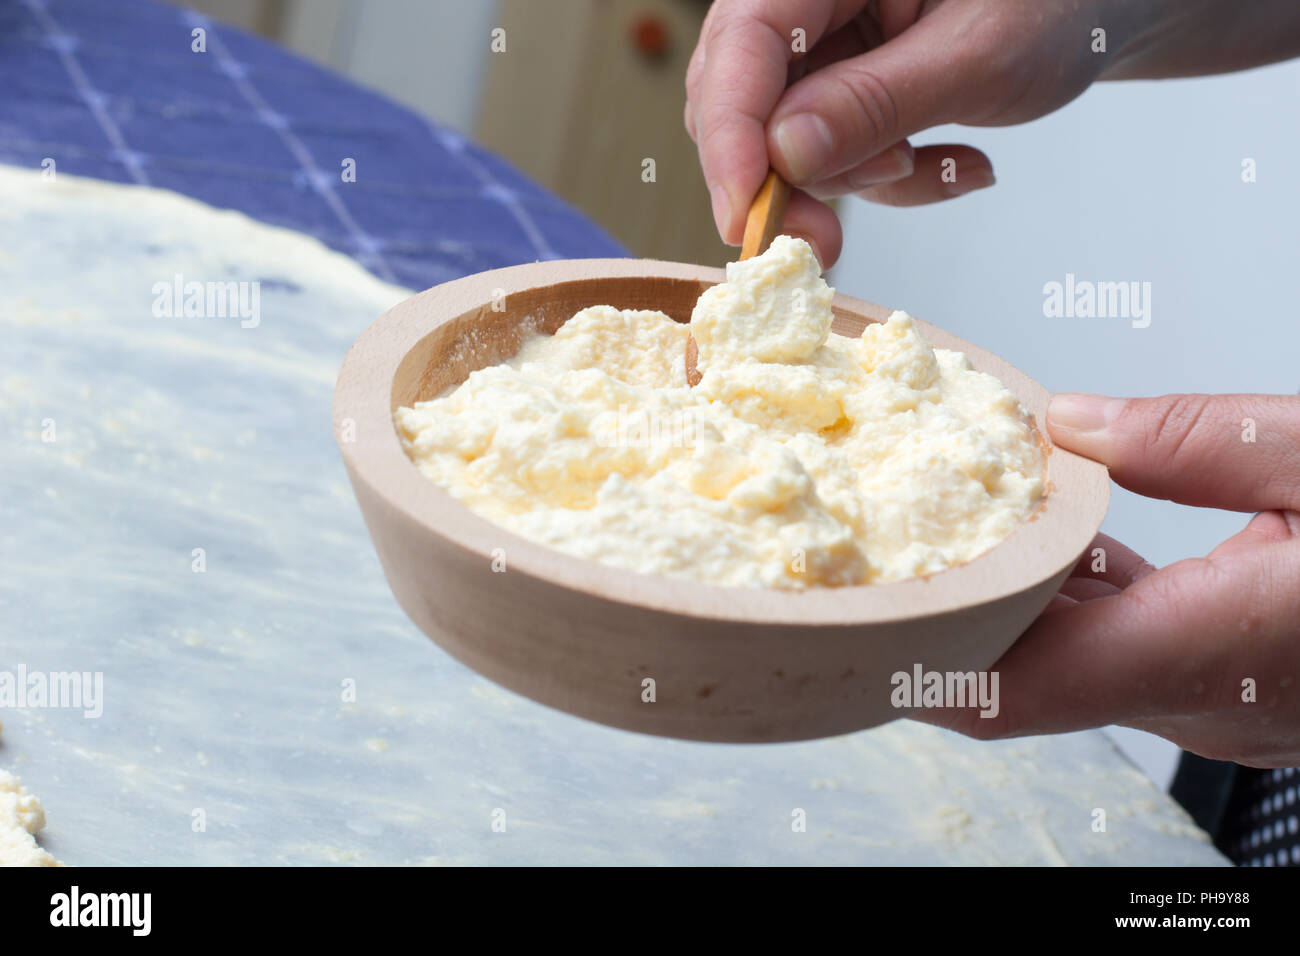 Making of Homemade cheese Pie or other kind of pastry. Stock Photo